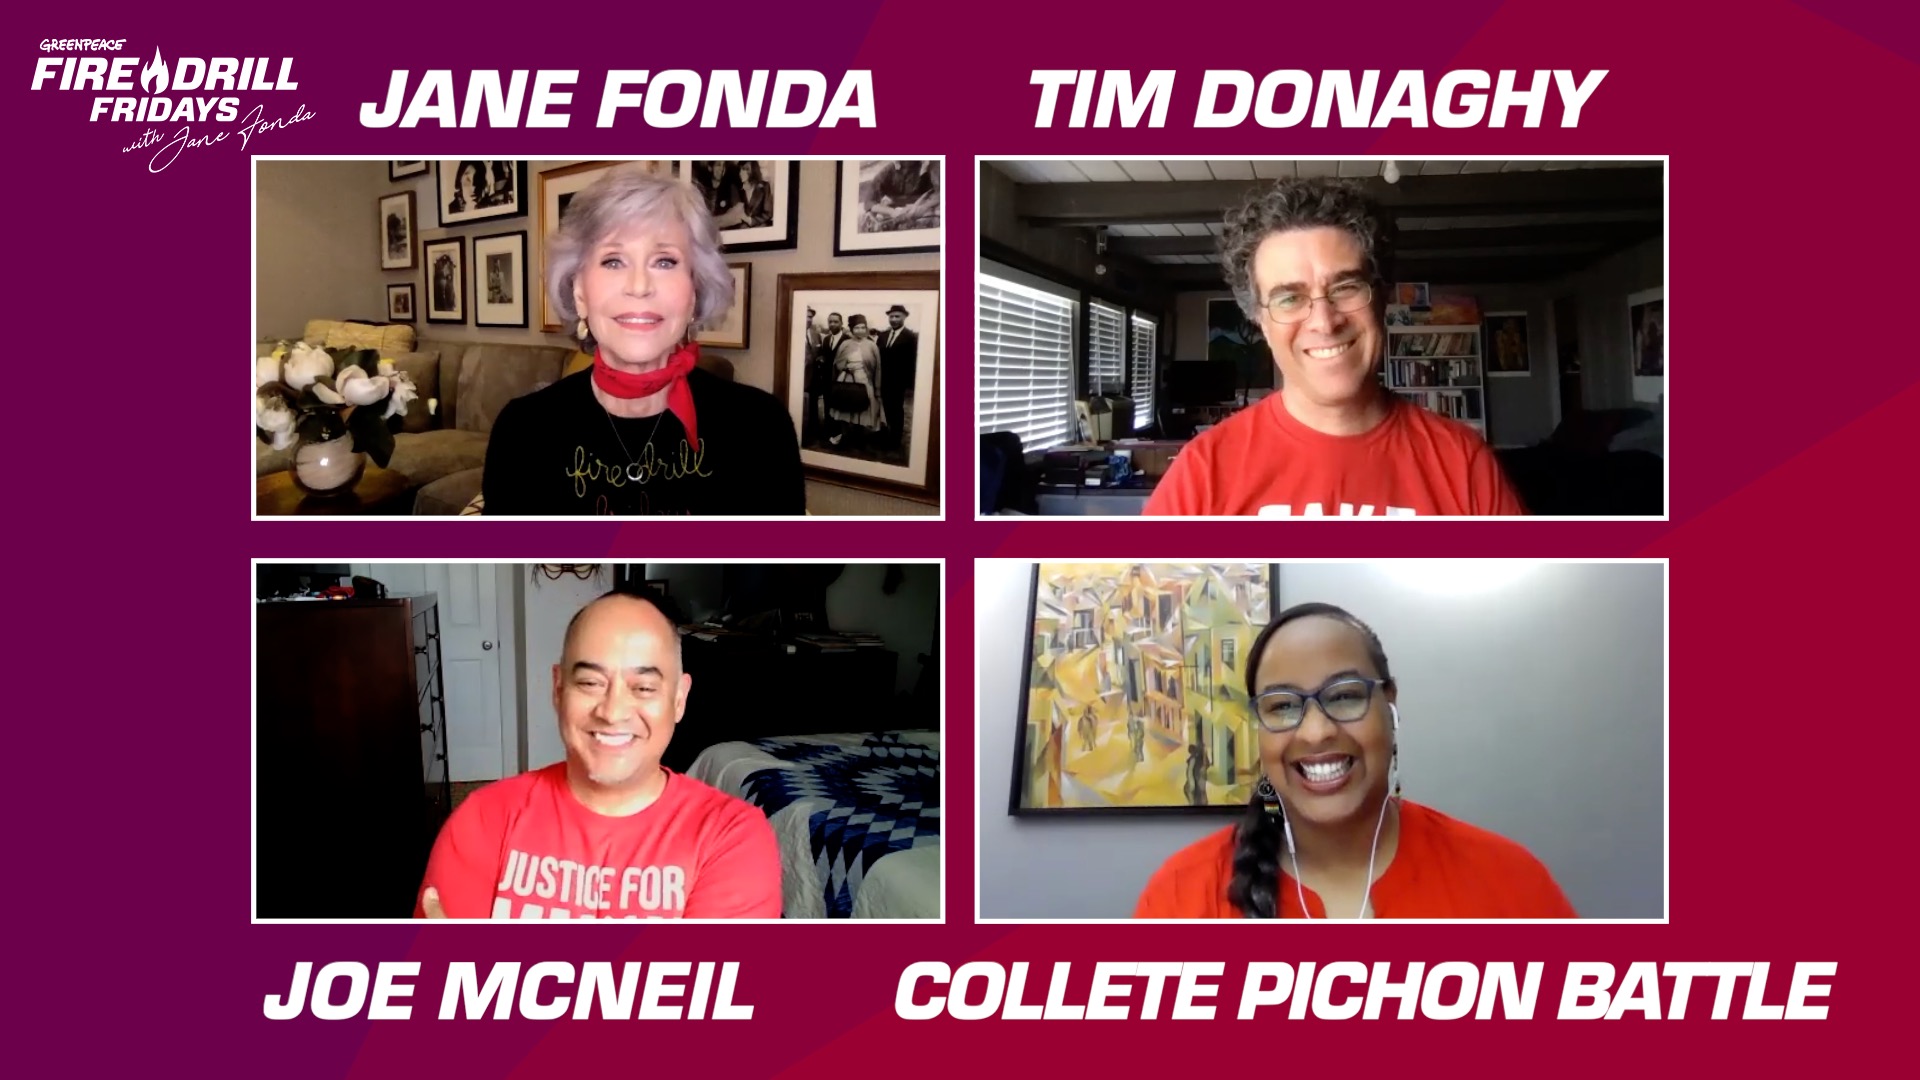 Watch Collete Pichon Battle, Joe McNeil, & Tim Donaghy on Fossil Fuel Racism